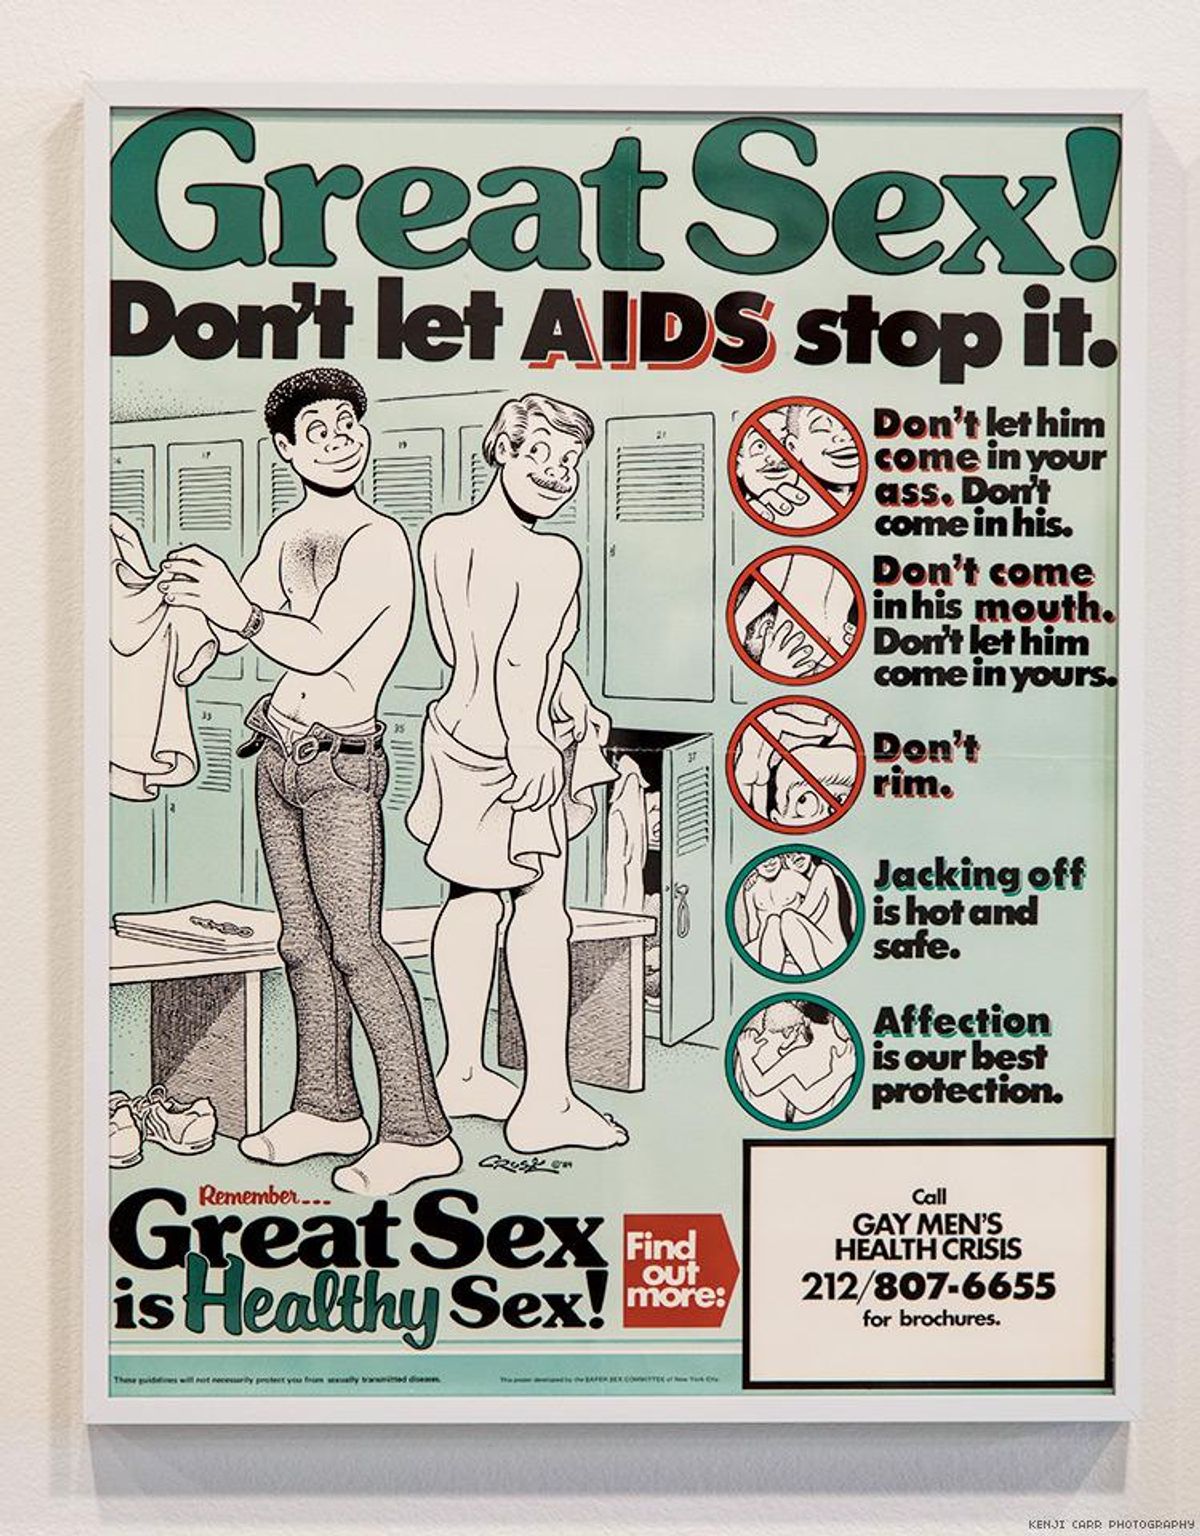 Safer Sex Imagery In The Time of AIDS